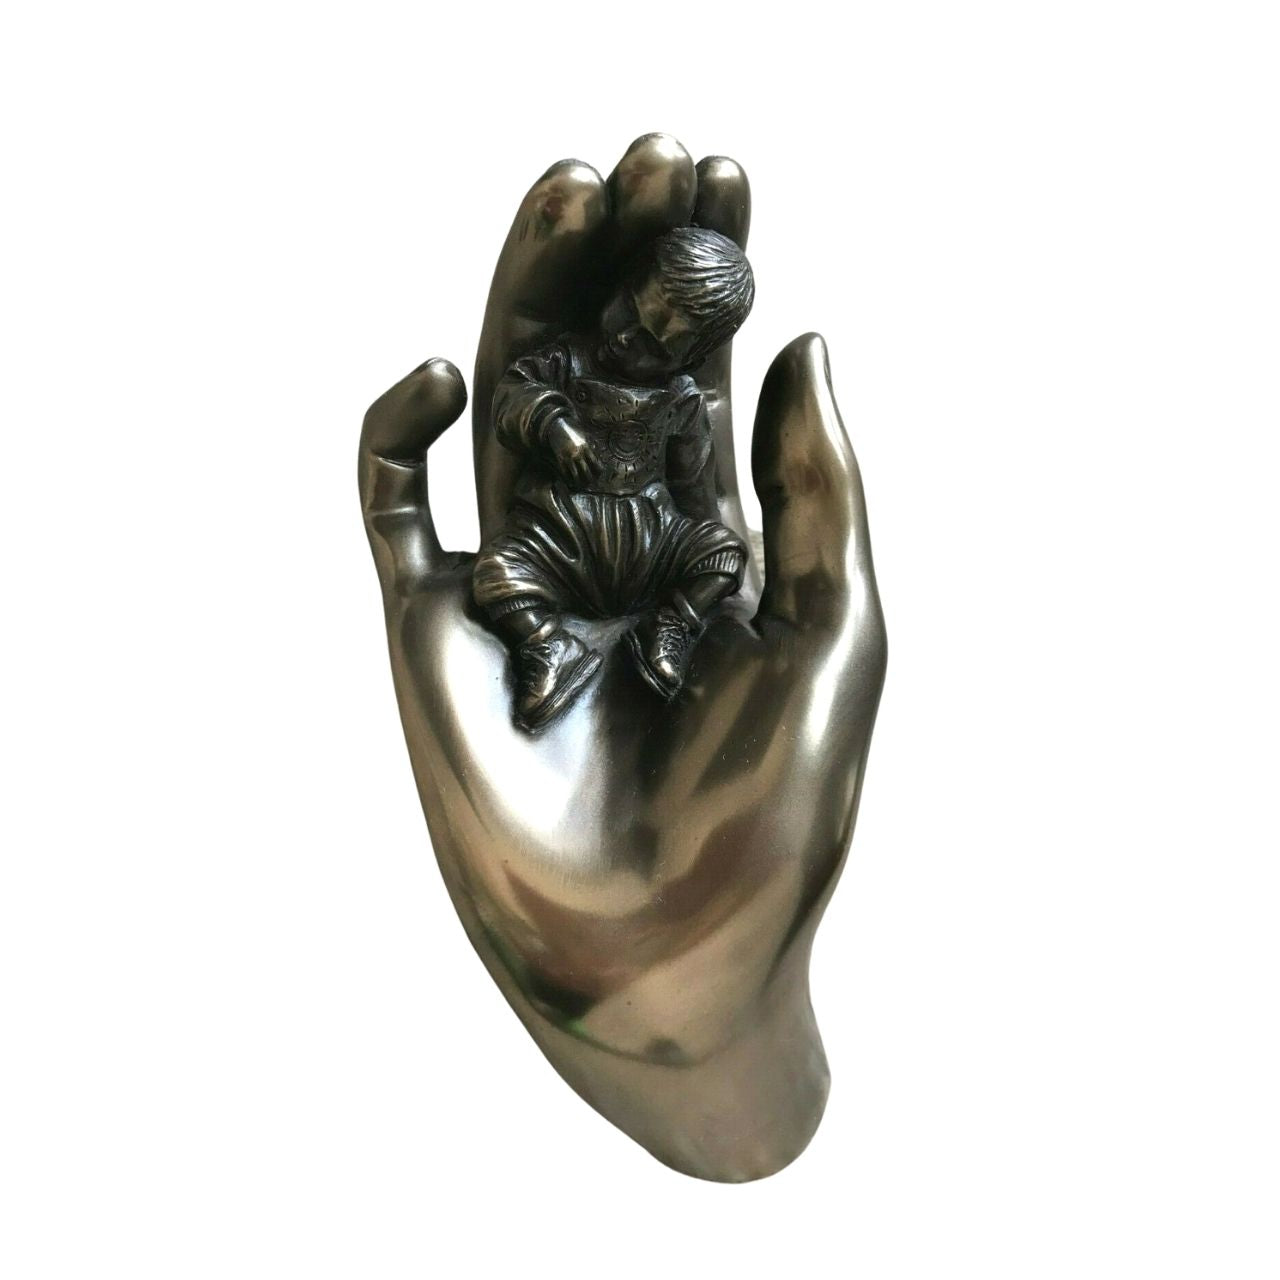 Genesis Caring Baby Boy  Beautifully crafted in cold cast bronze this wonderful baby figurine from the craftsmen of Genesis Fine Arts depicts the sleeping baby boy carefully curled up in a mothers caring hand.  Caring Baby Boy, birth or christening gift.